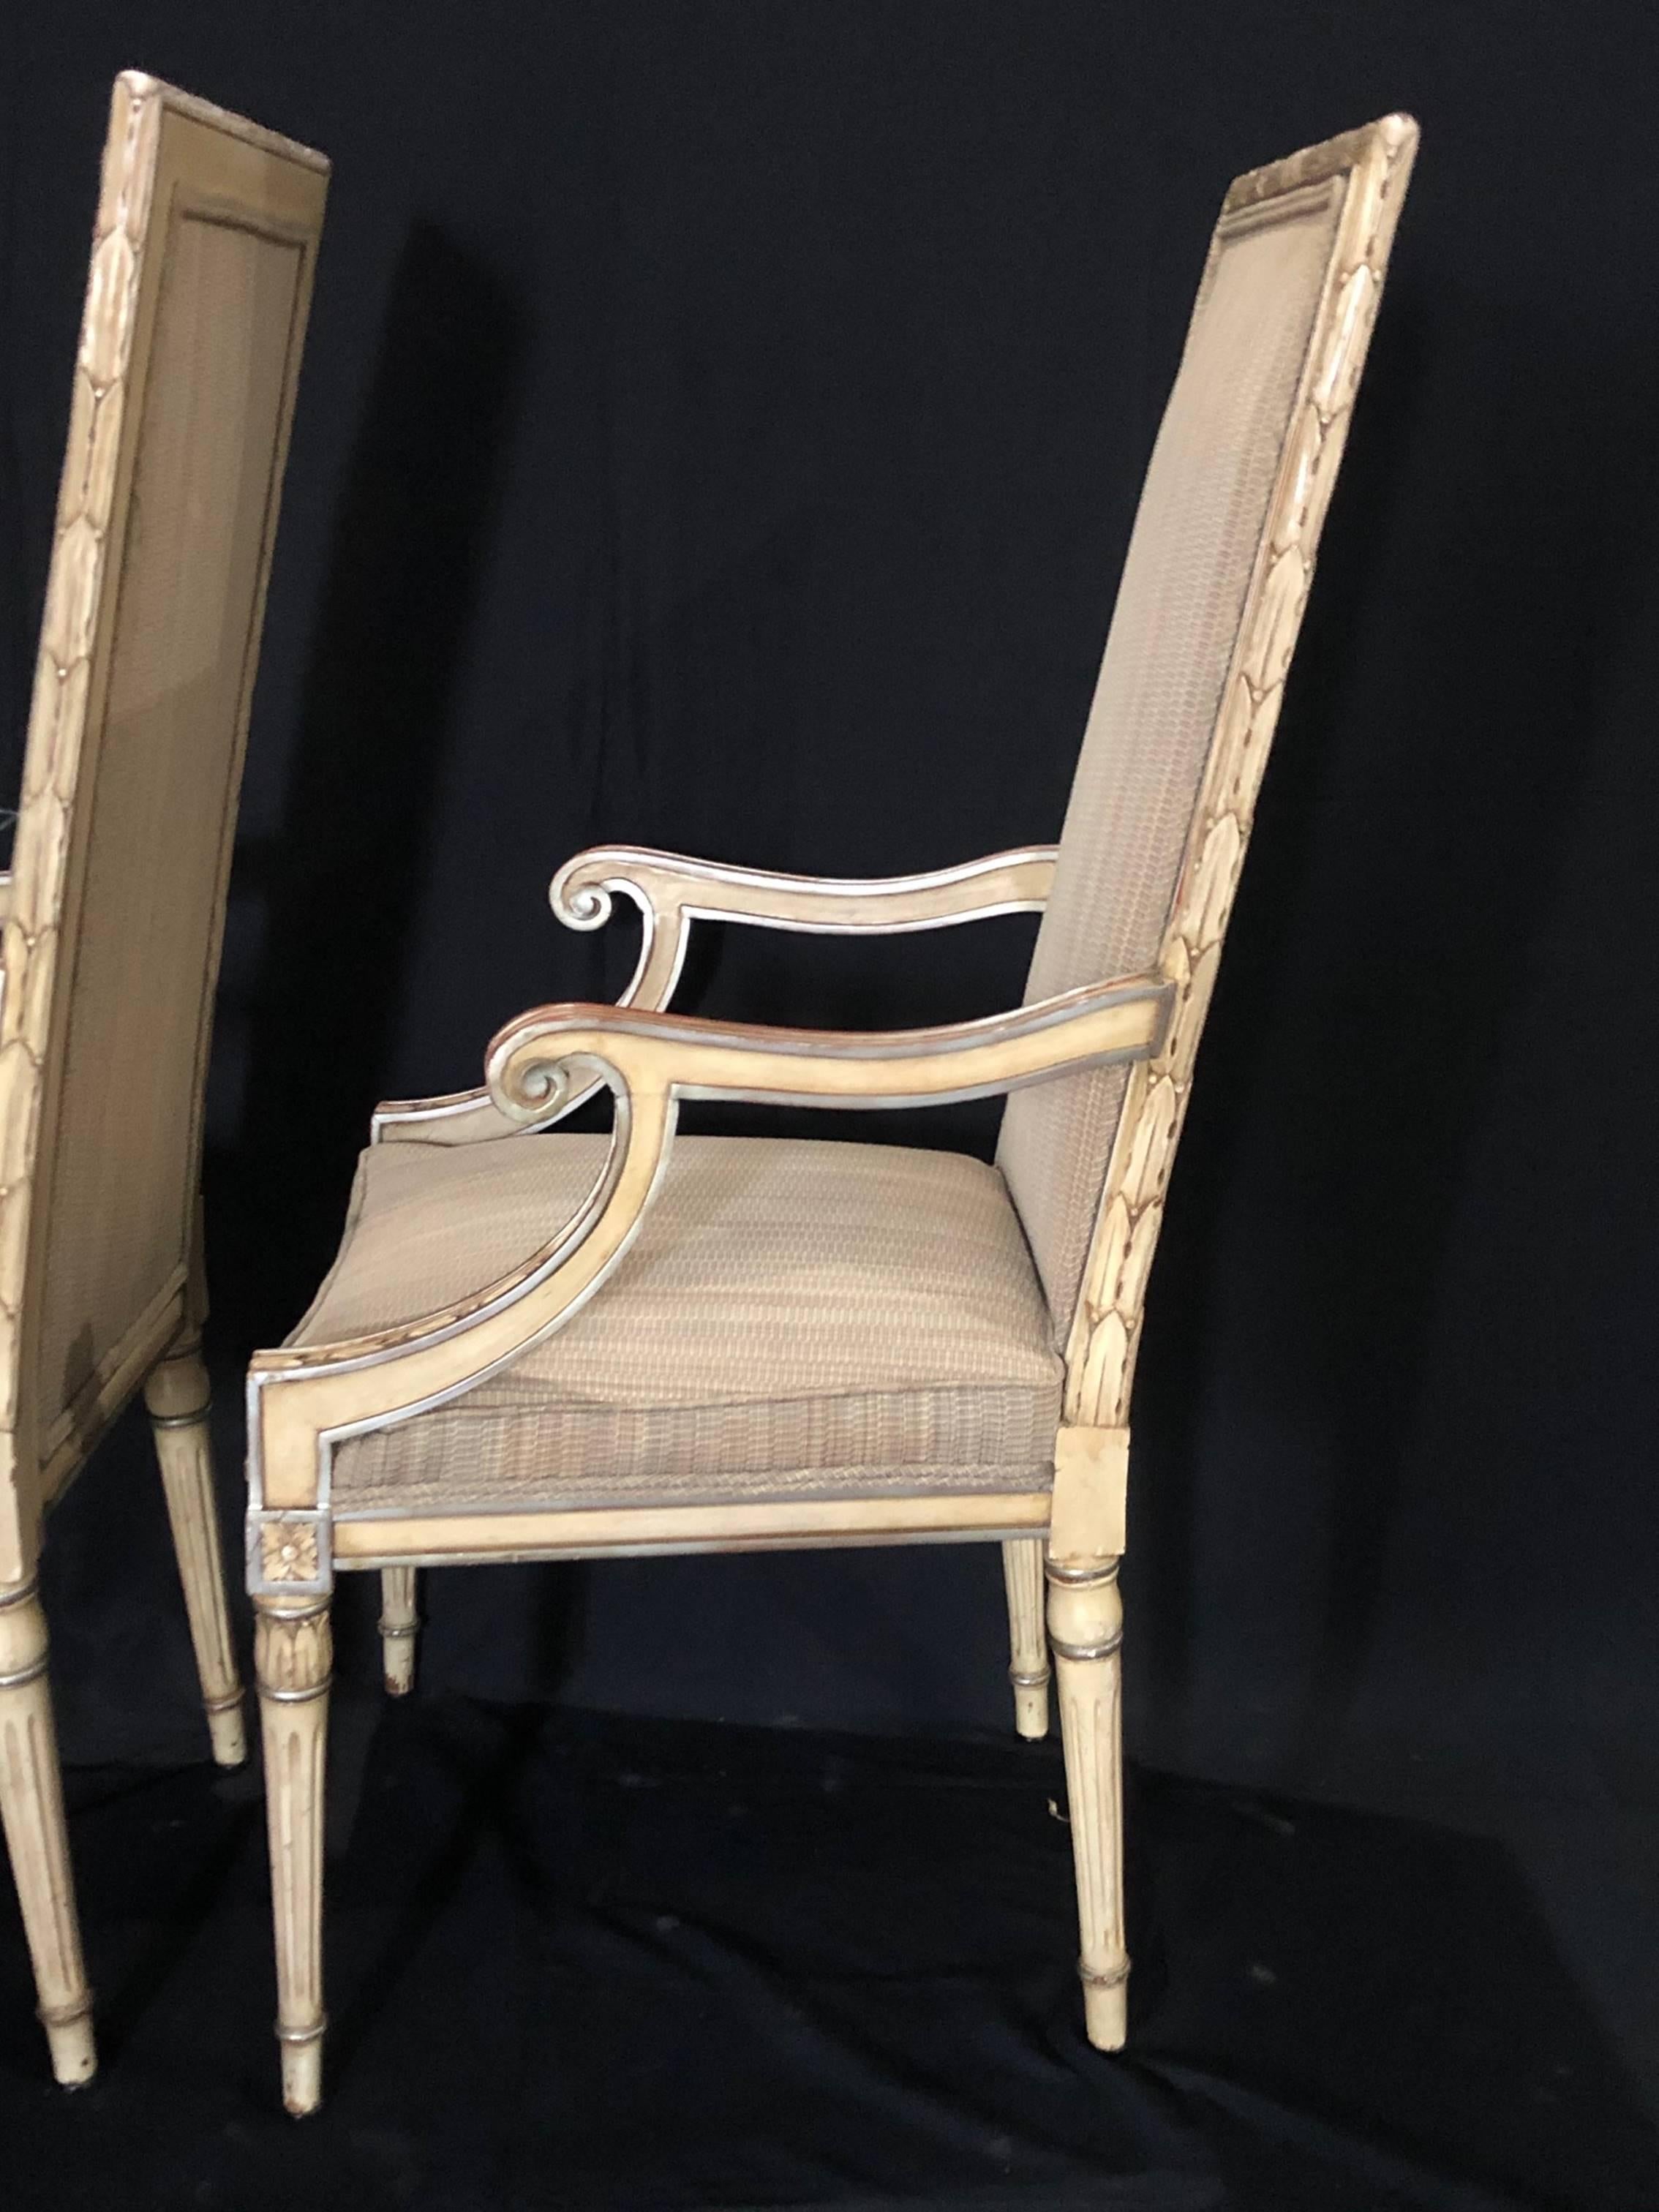 Upholstery Stunning Pair of Louis XVI Style Painted and Upholstered Neoclassical Armchairs